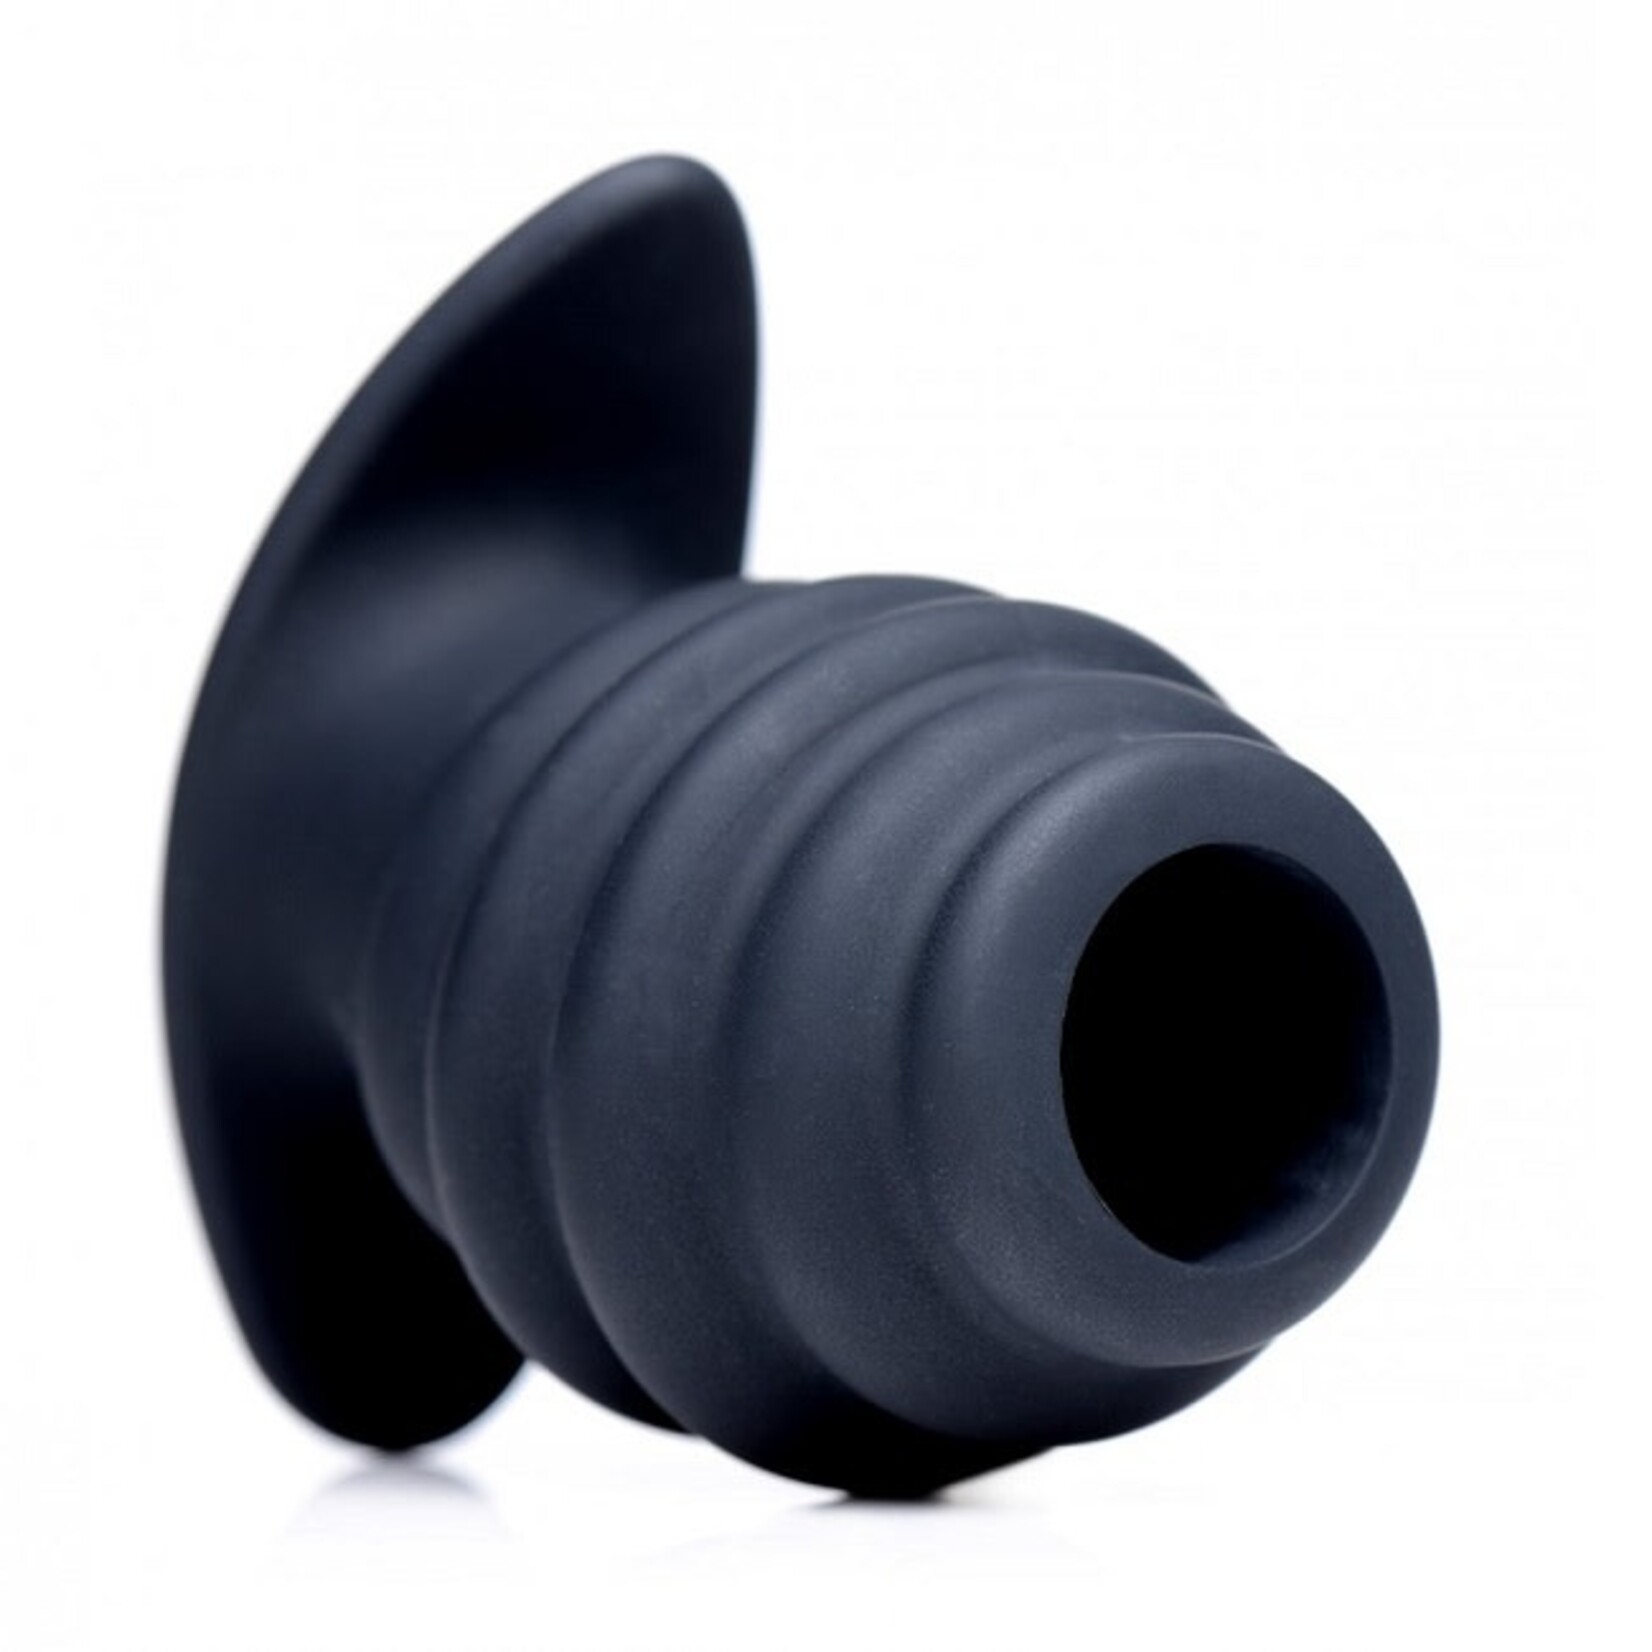 Master Series Master Series Hive Ass Tunnel Silicone Ribbed Hollow Anal Plug - Small